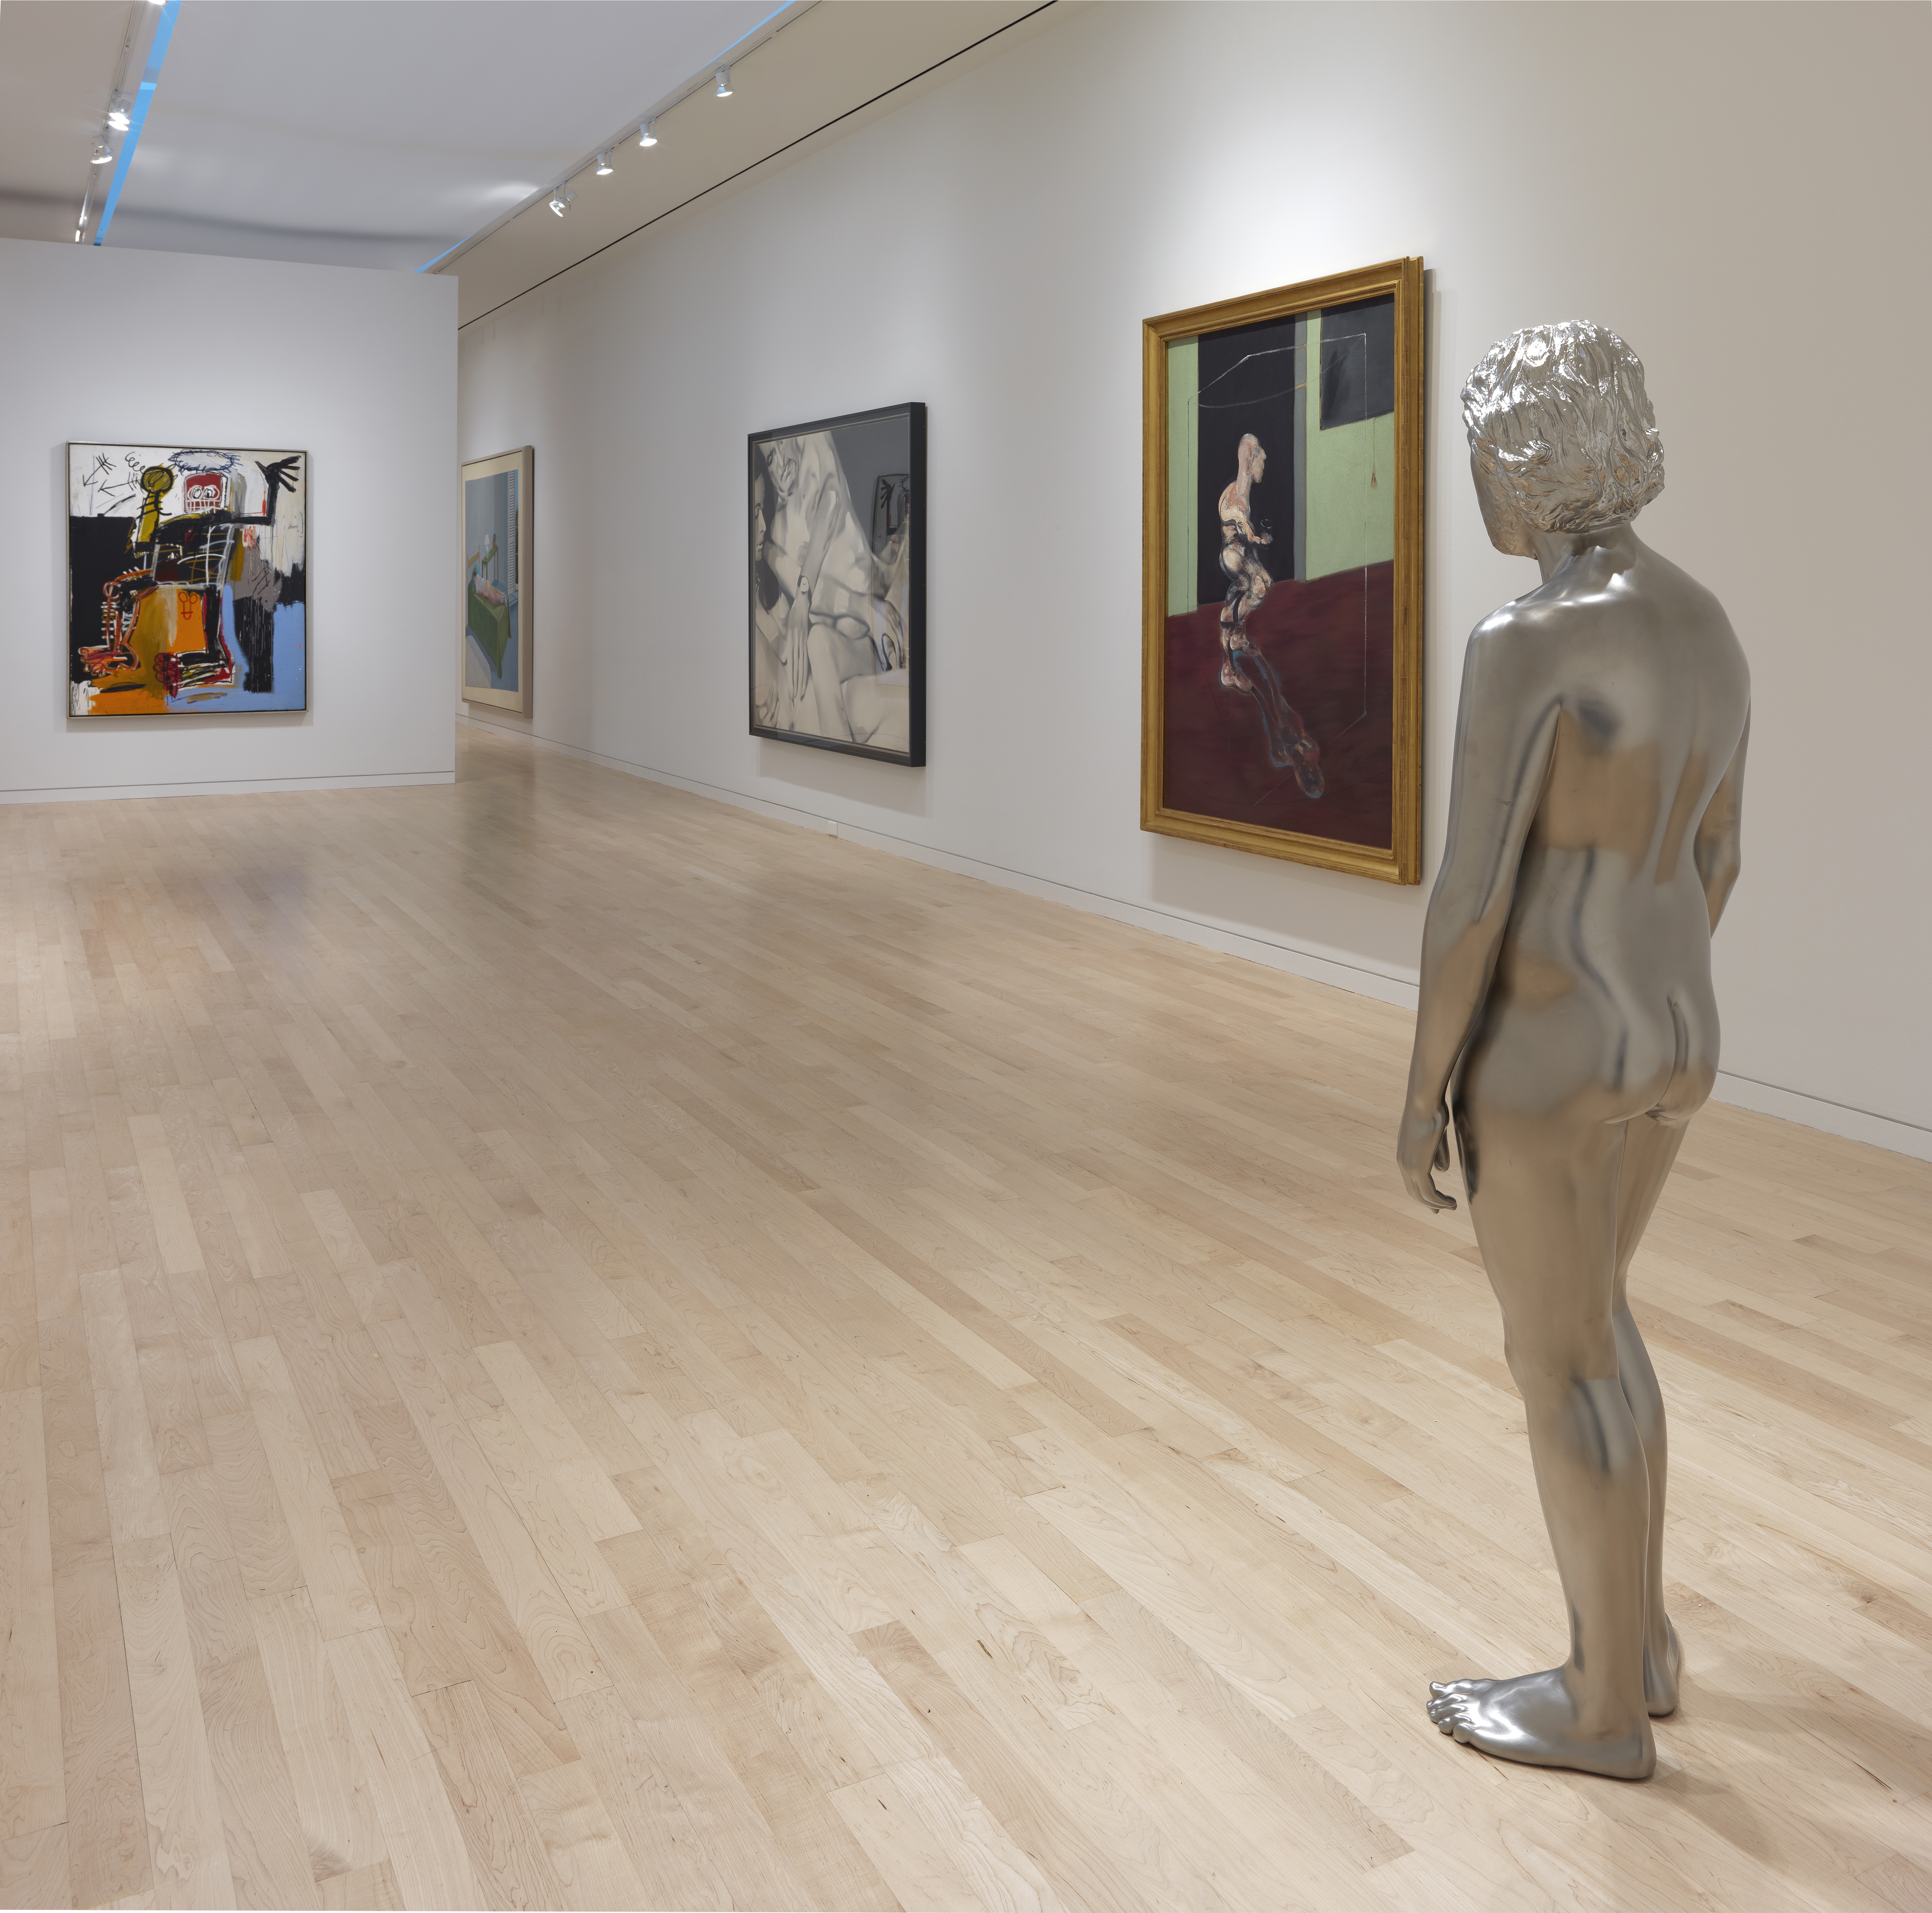 Installation view of Nude: From Modigliani to Currin, Gagosian, Madison Avenue, New York, 20 September – 19 November, 2016 (feat 62-06)